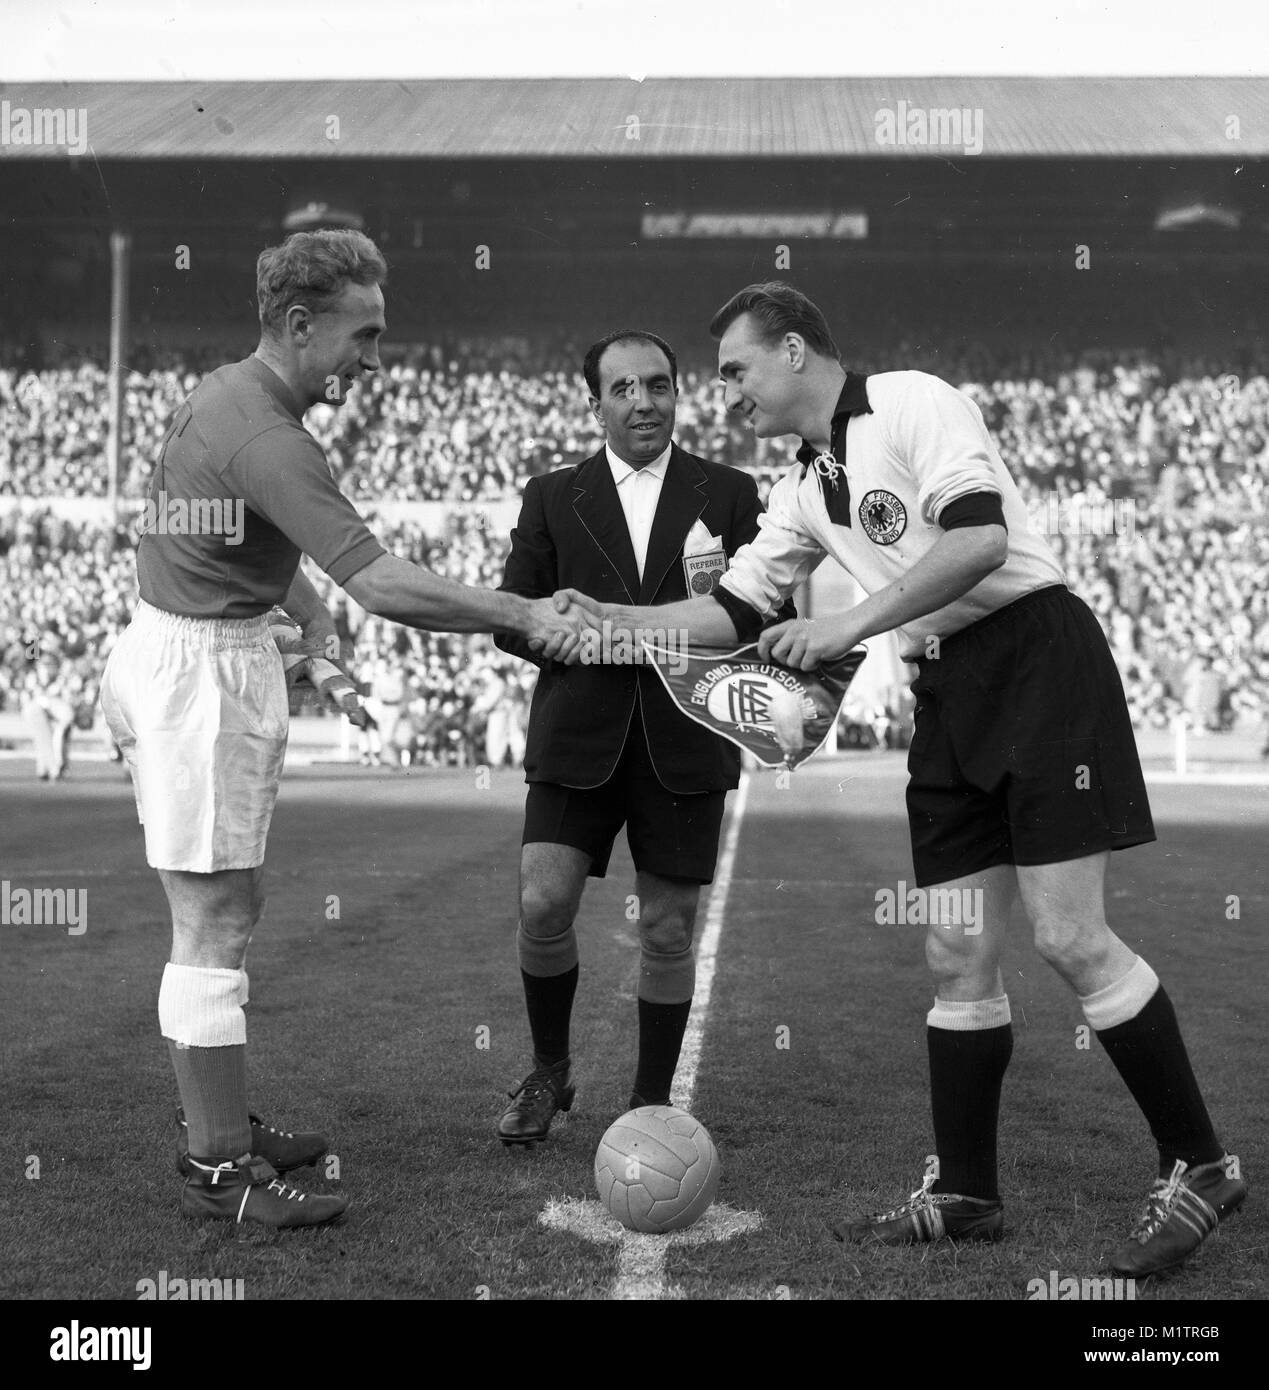 England v West Germany, Wembley Stadium 01 December 1954 England captain Billy Wright shaking hands with the captain of West Germany Josef Posipal watched by referee Vicenzo Orlandini Stock Photo